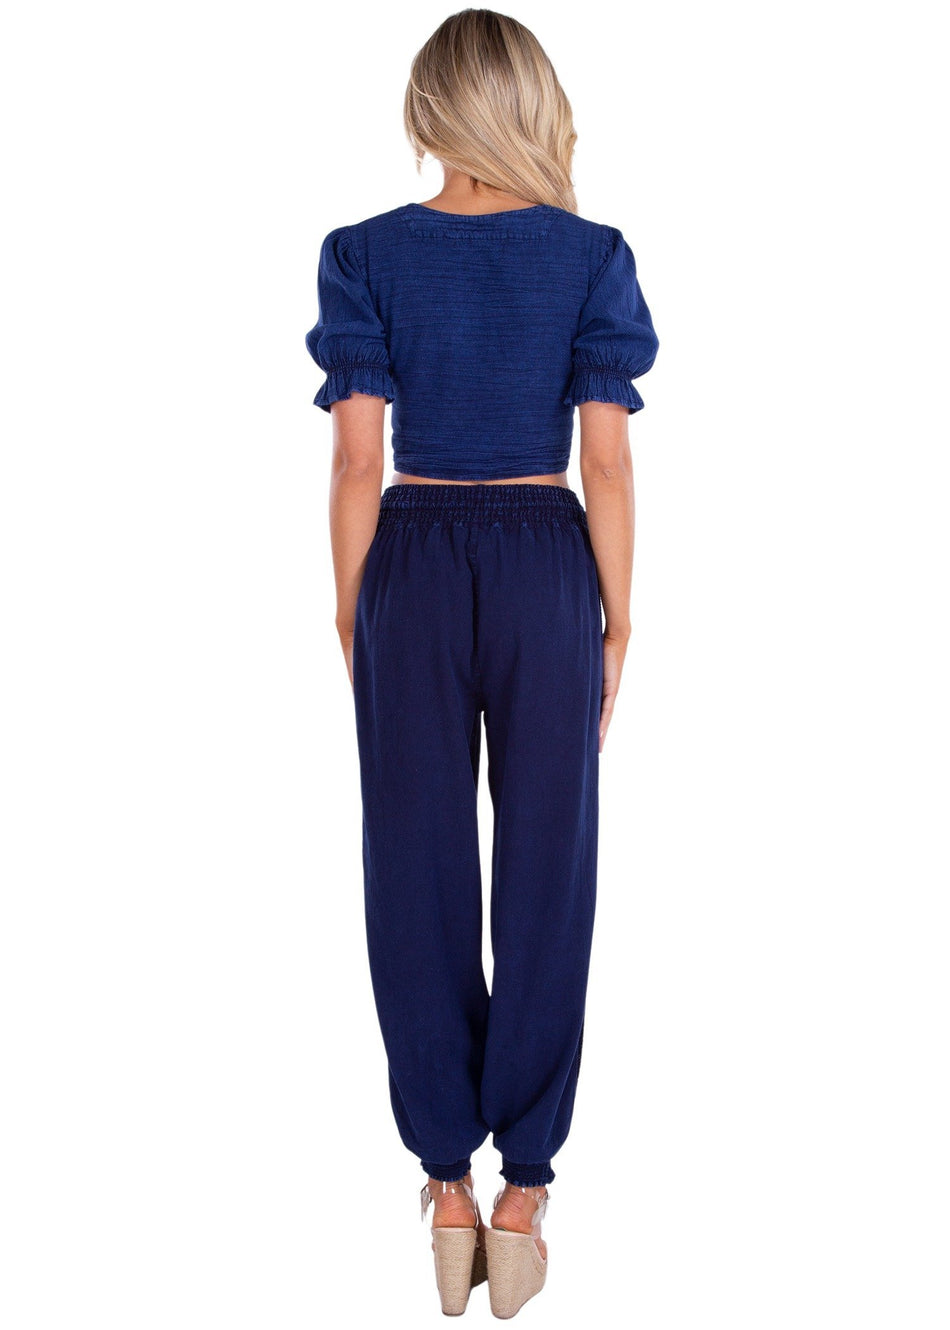 NW1326 - Navy Cotton Pants